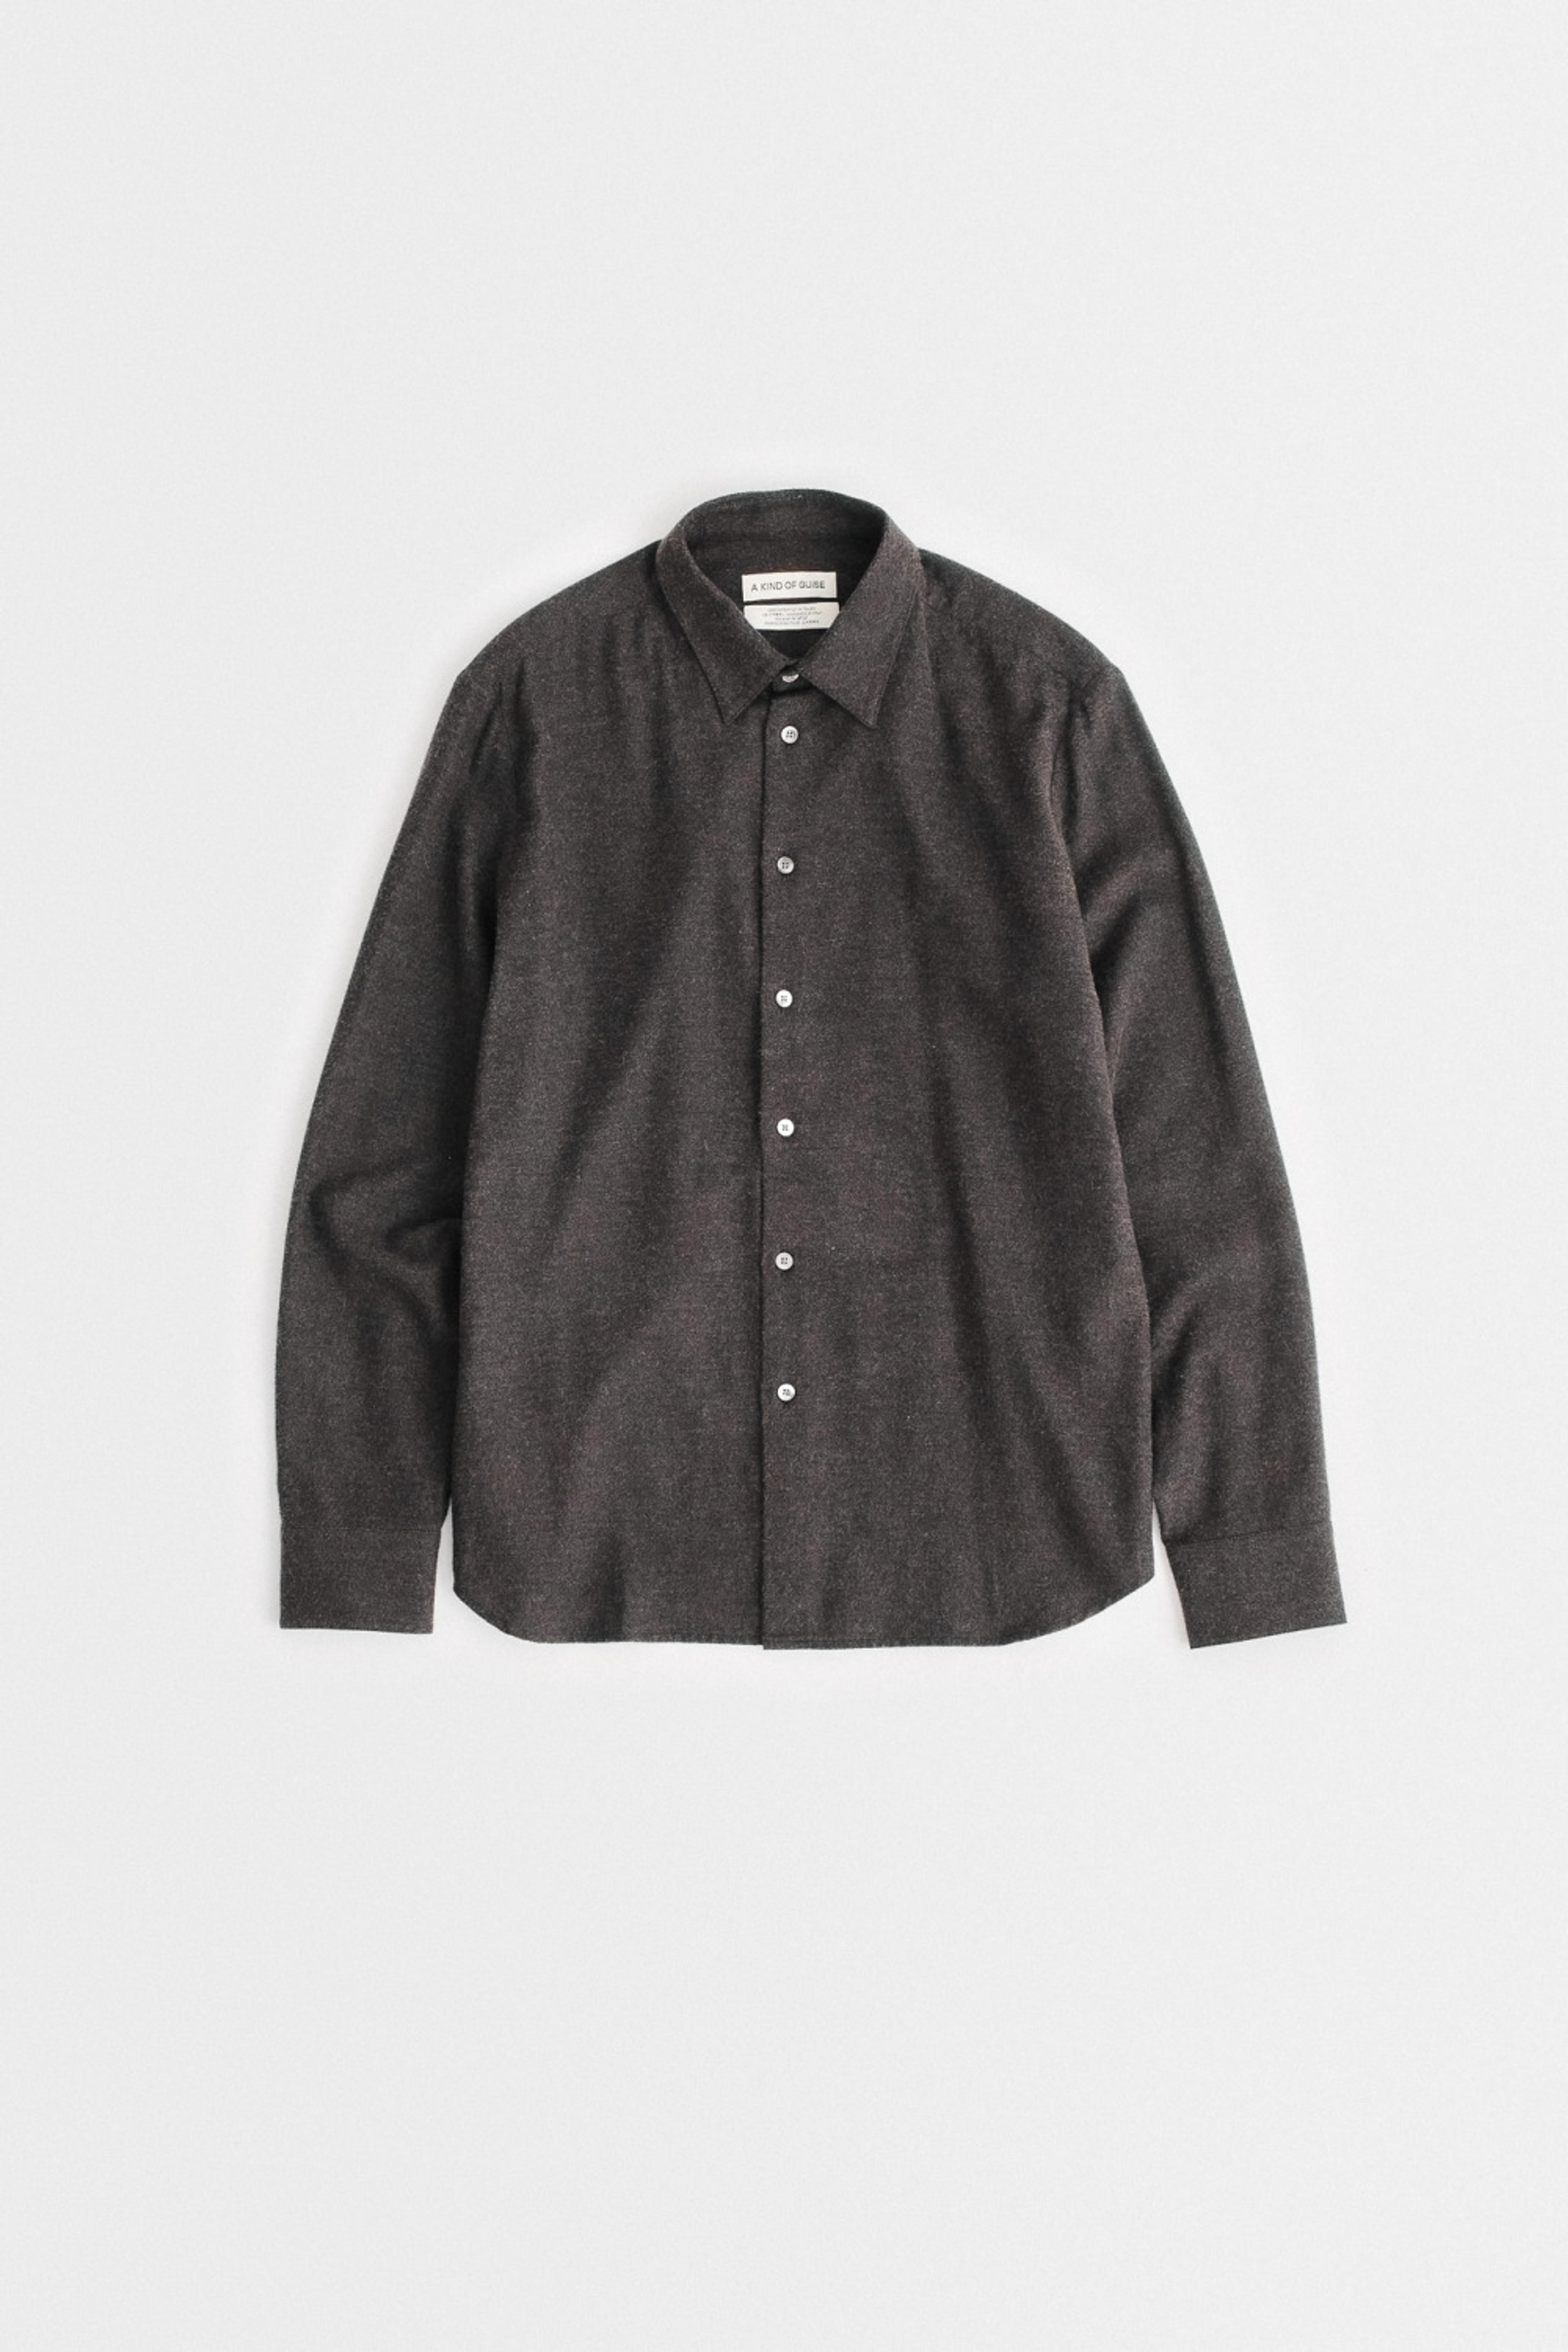 Flores Shirt – A Kind of Guise